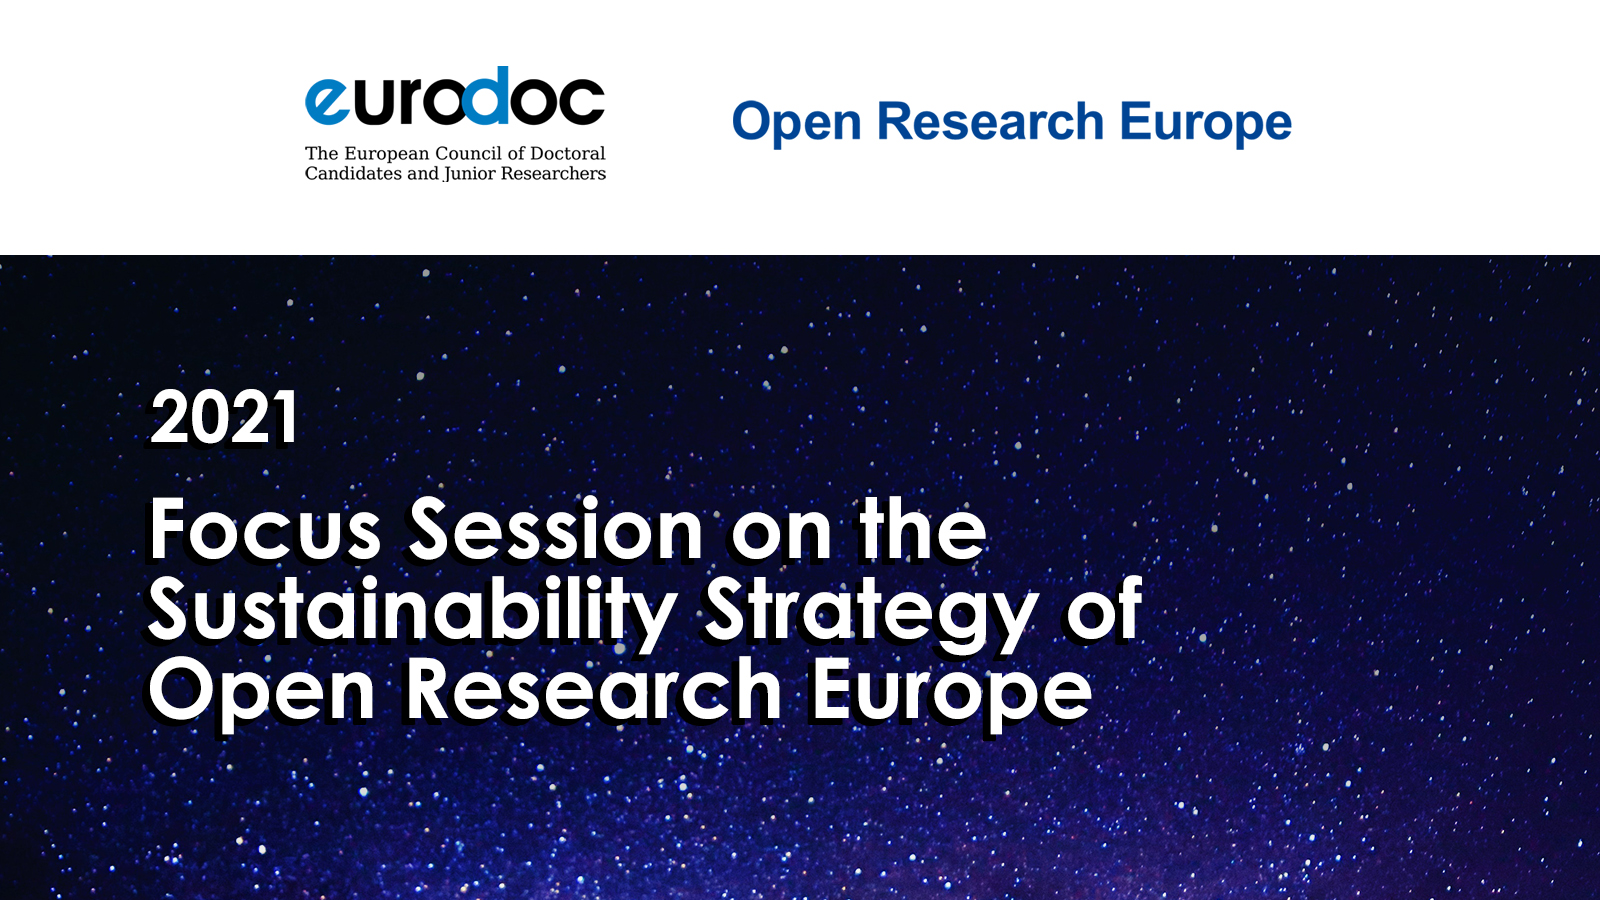 Focus Session on the Sustainability Strategy of Open Research Europe